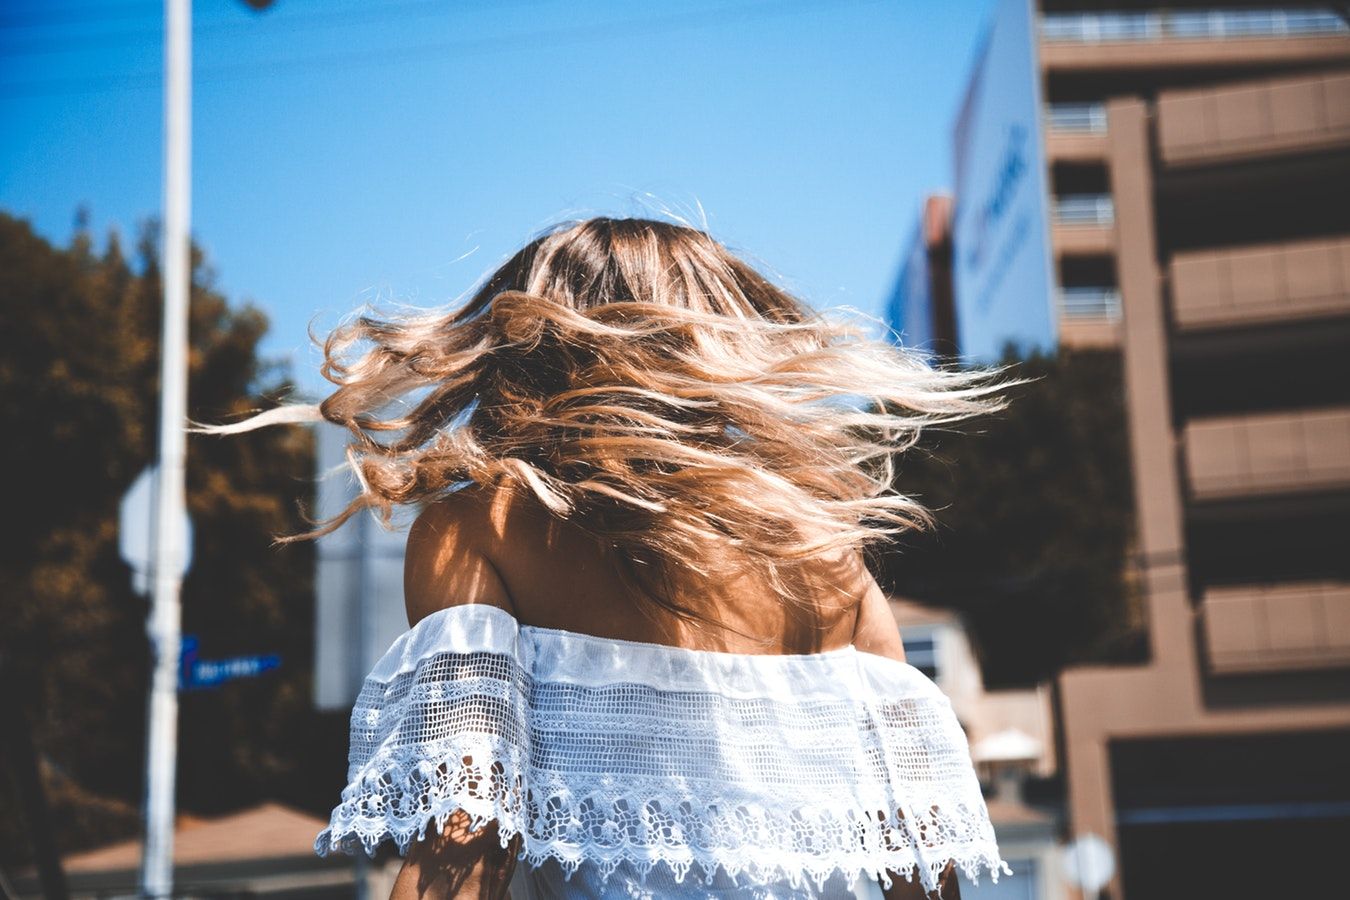 Hair, Photograph, Blue, Blond, Beauty, Daytime, Hairstyle, Snapshot, Sky, Fashion, 